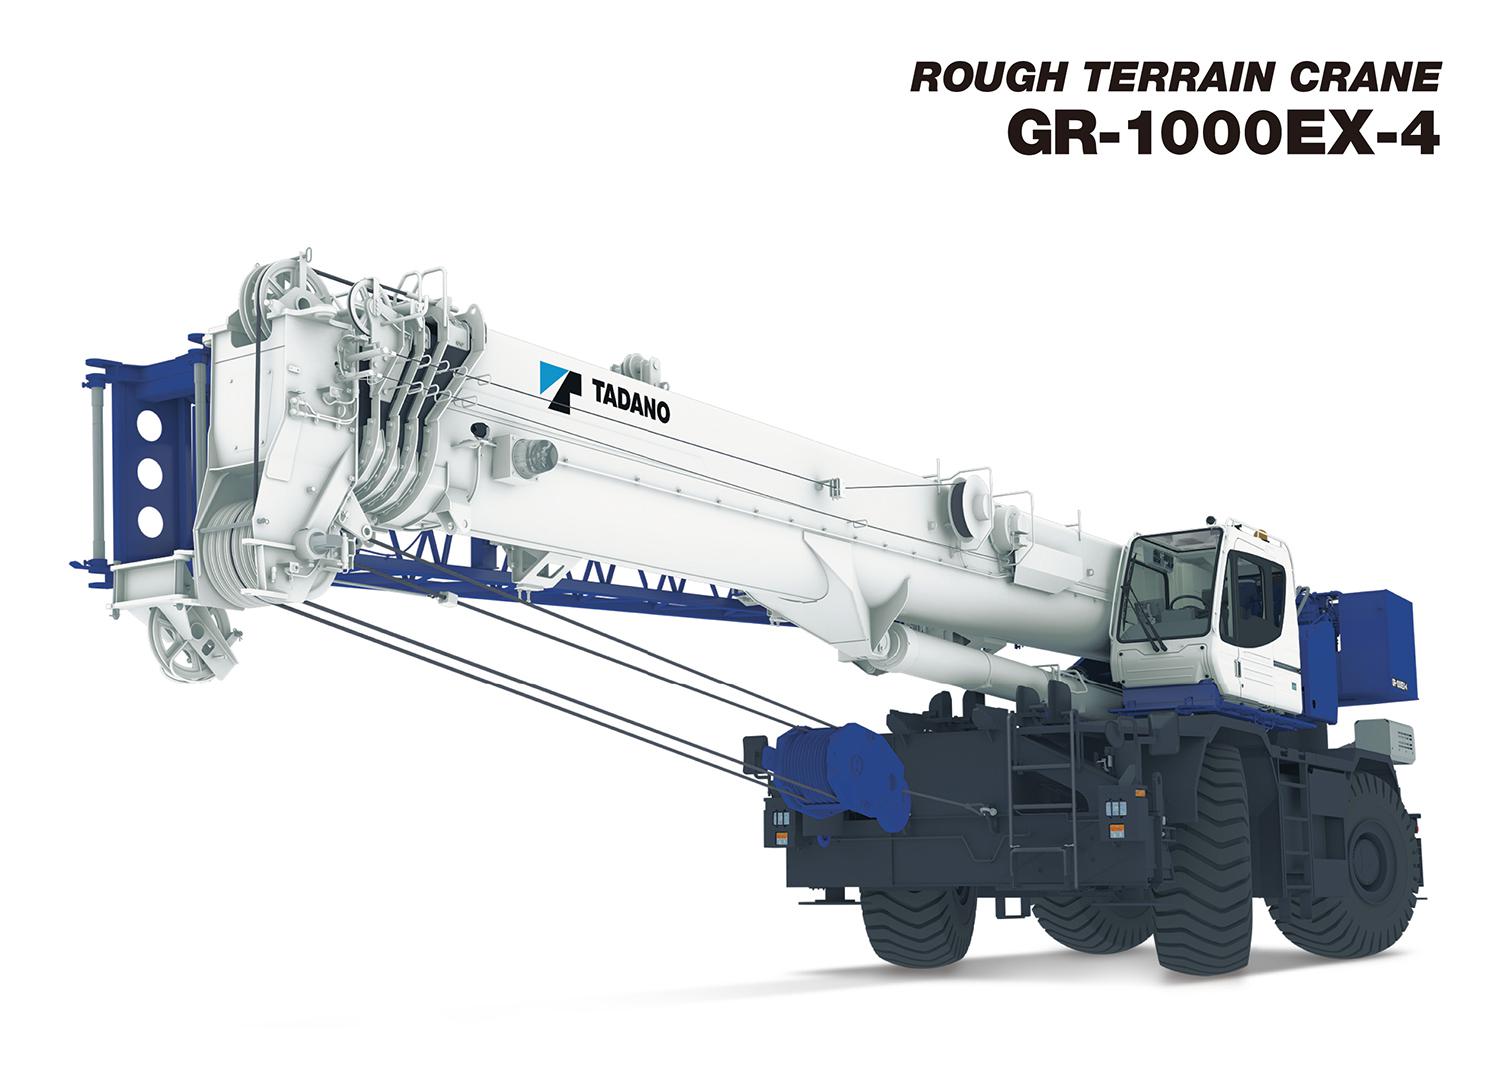 Introducing New Rough Terrain Cranes for the International Market